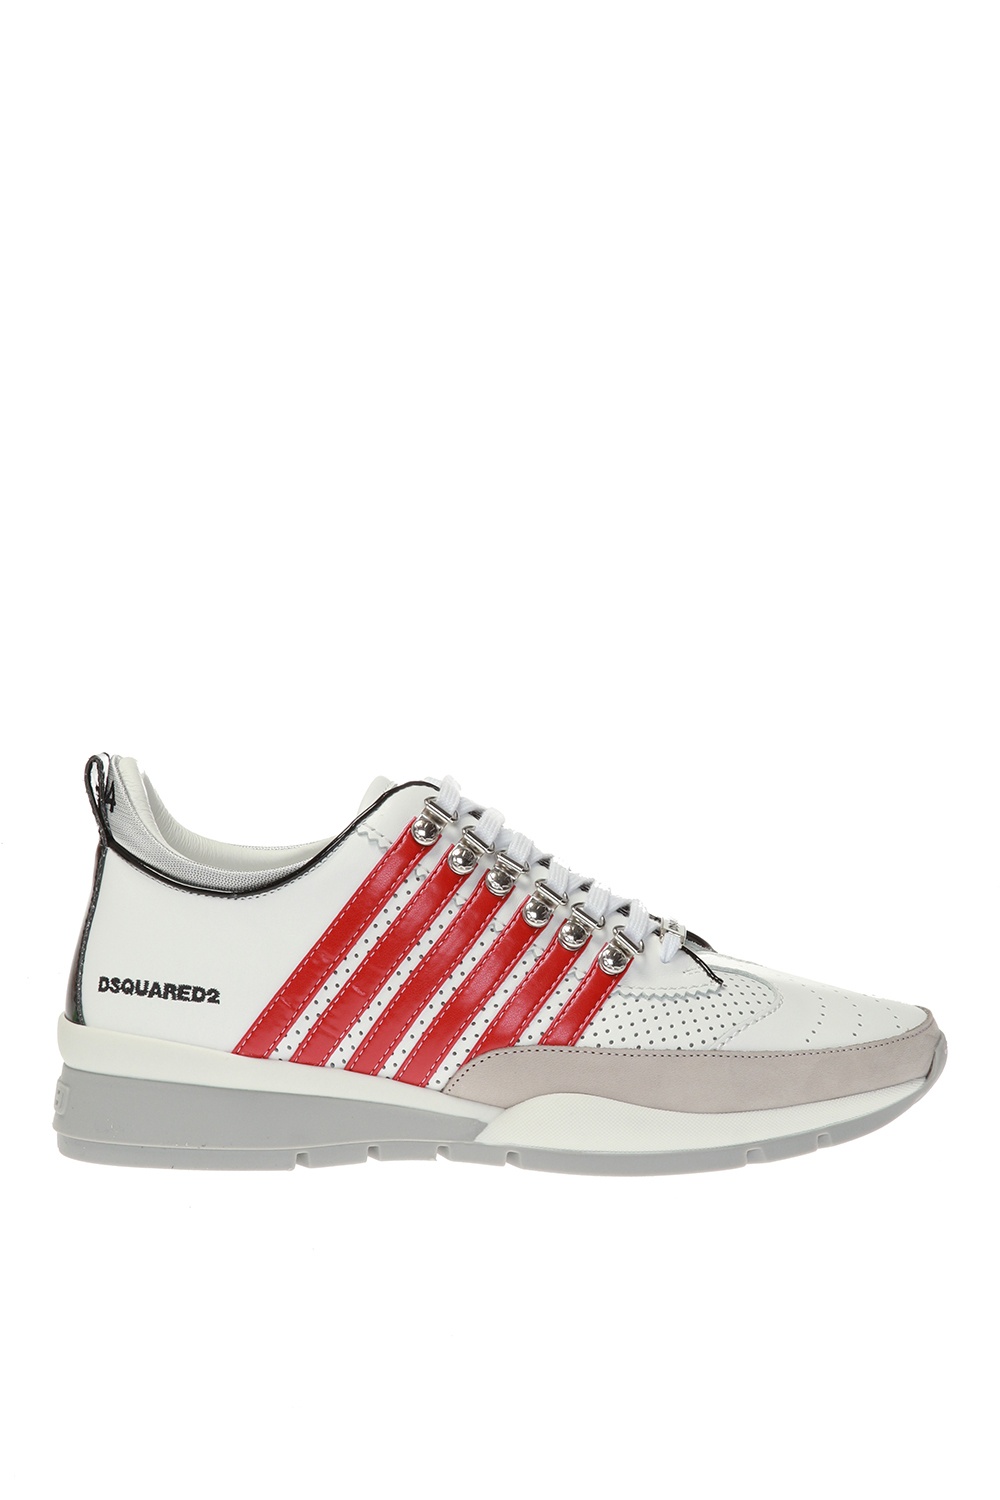 dsquared2 251 sneakers